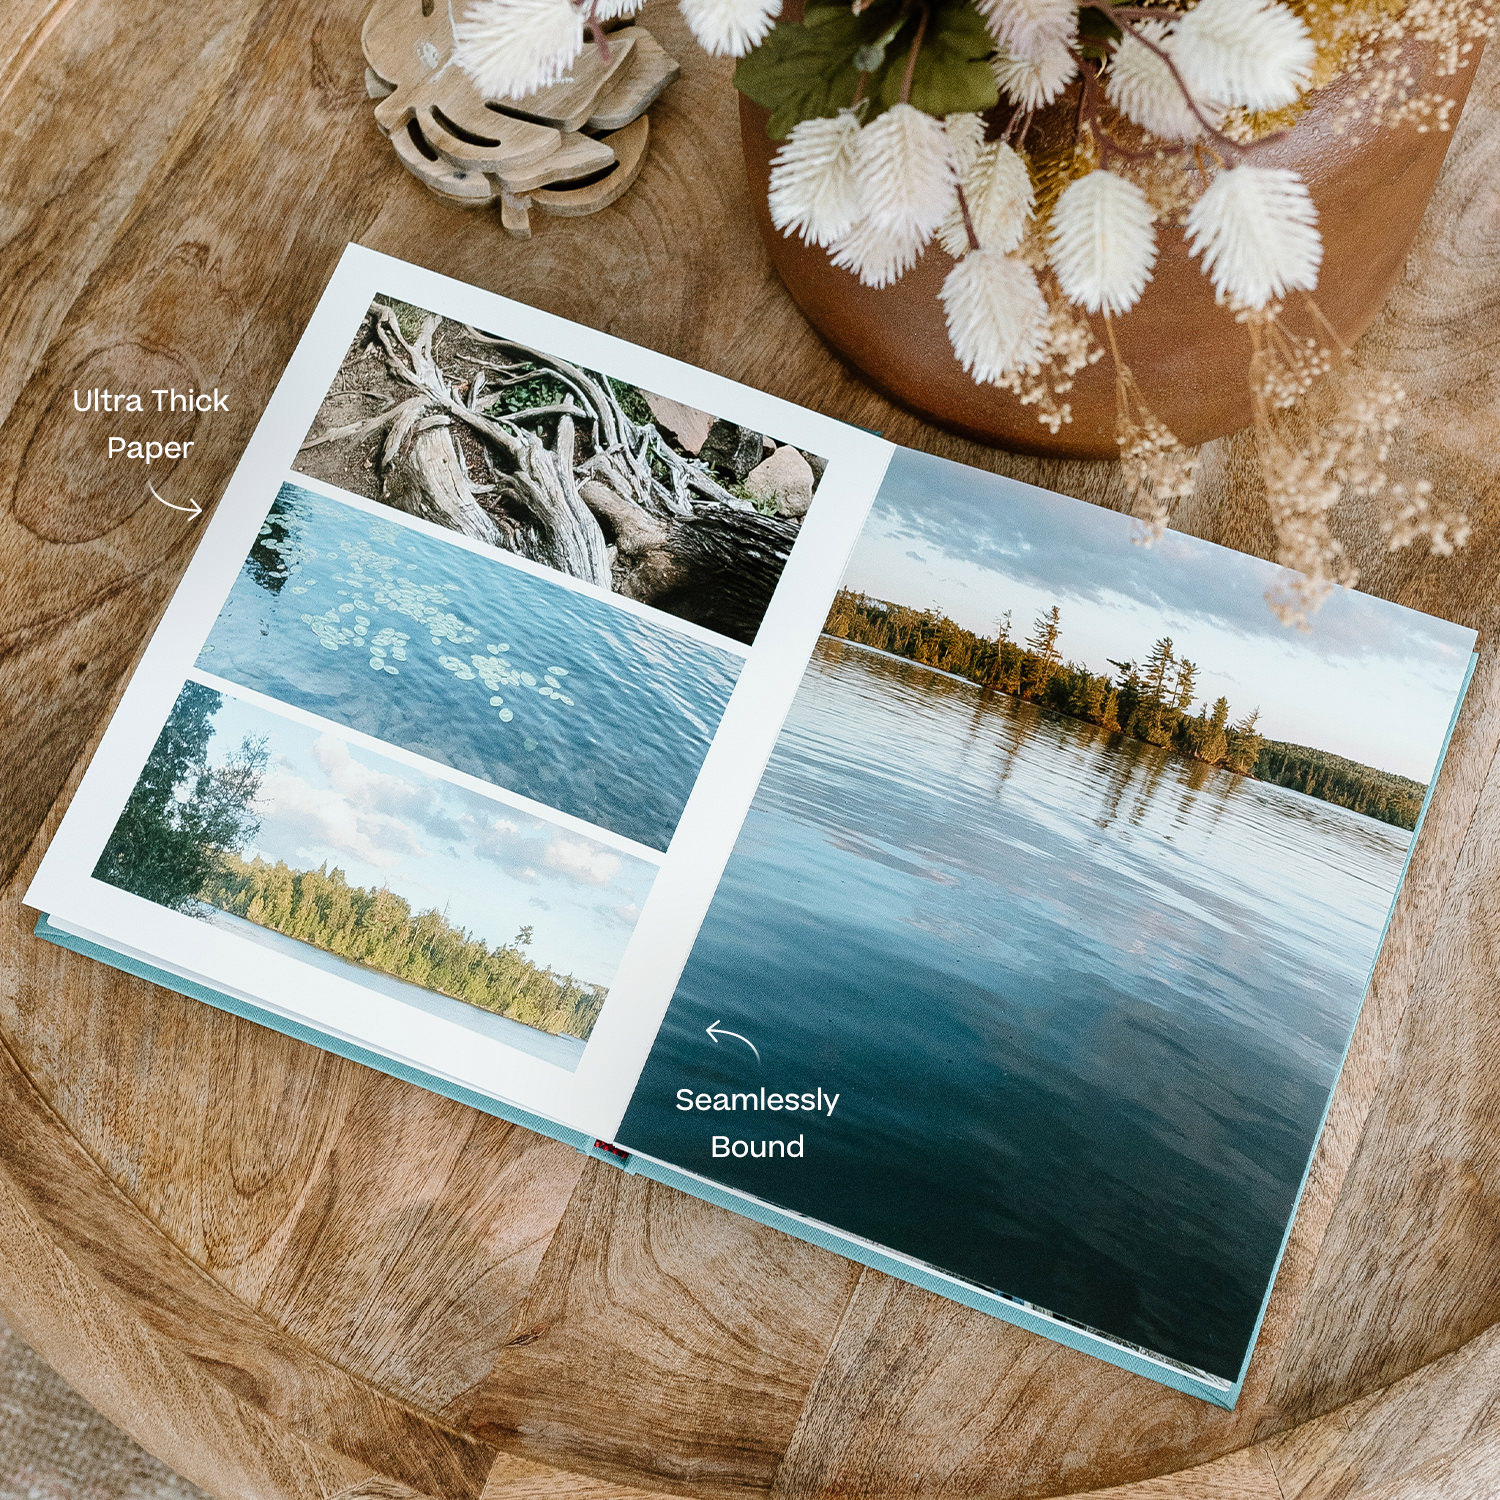 Layflat Photo Album, The best layflat photo book you can make on a budget